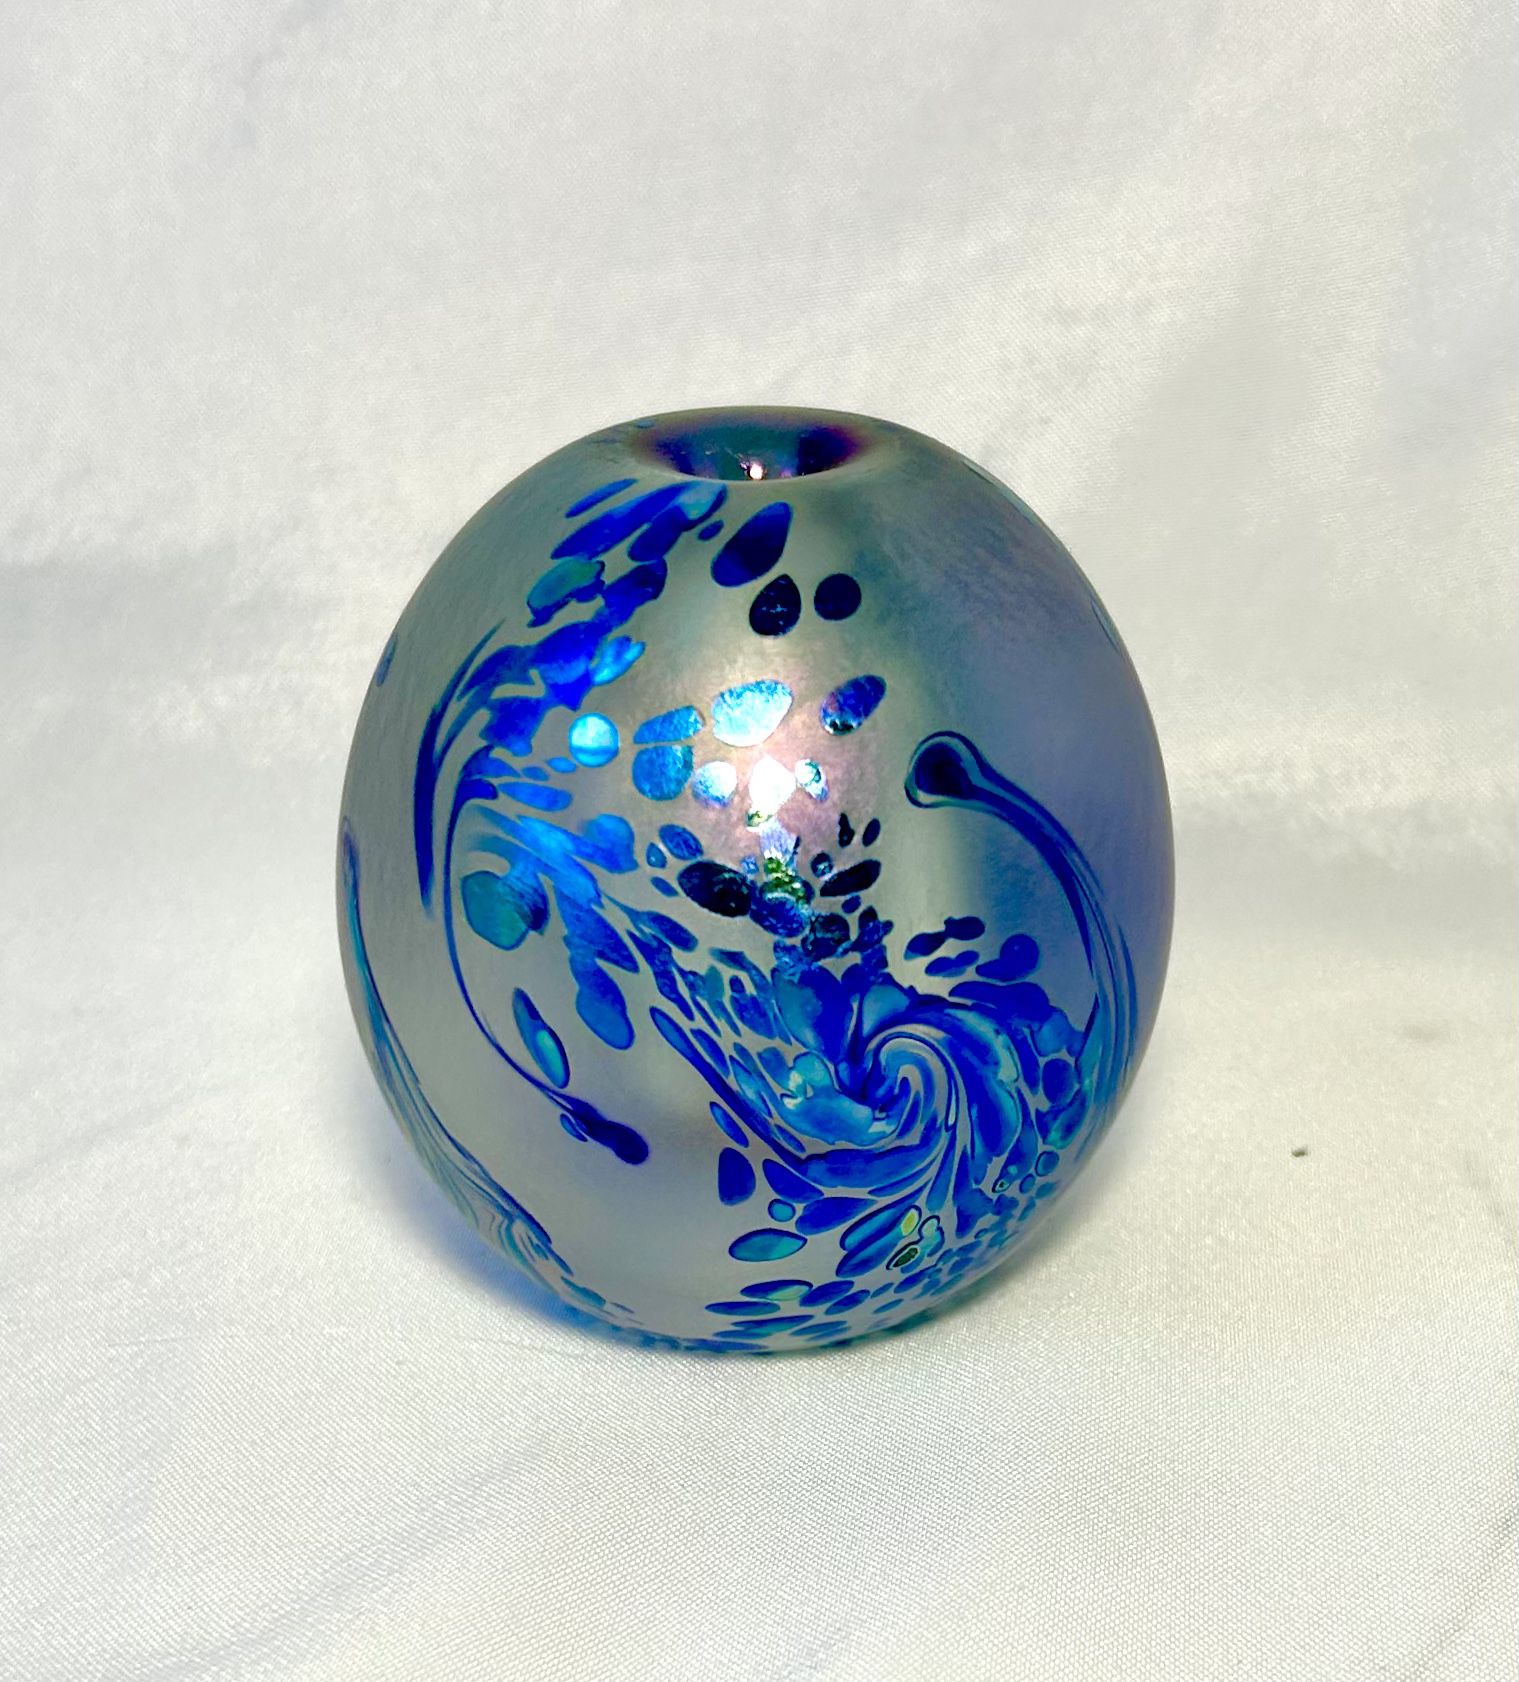 ROBERT EICKHOLT Irridescent glass scent bottle paperweight SIGNED 1996, bottle Only, beautiful colors